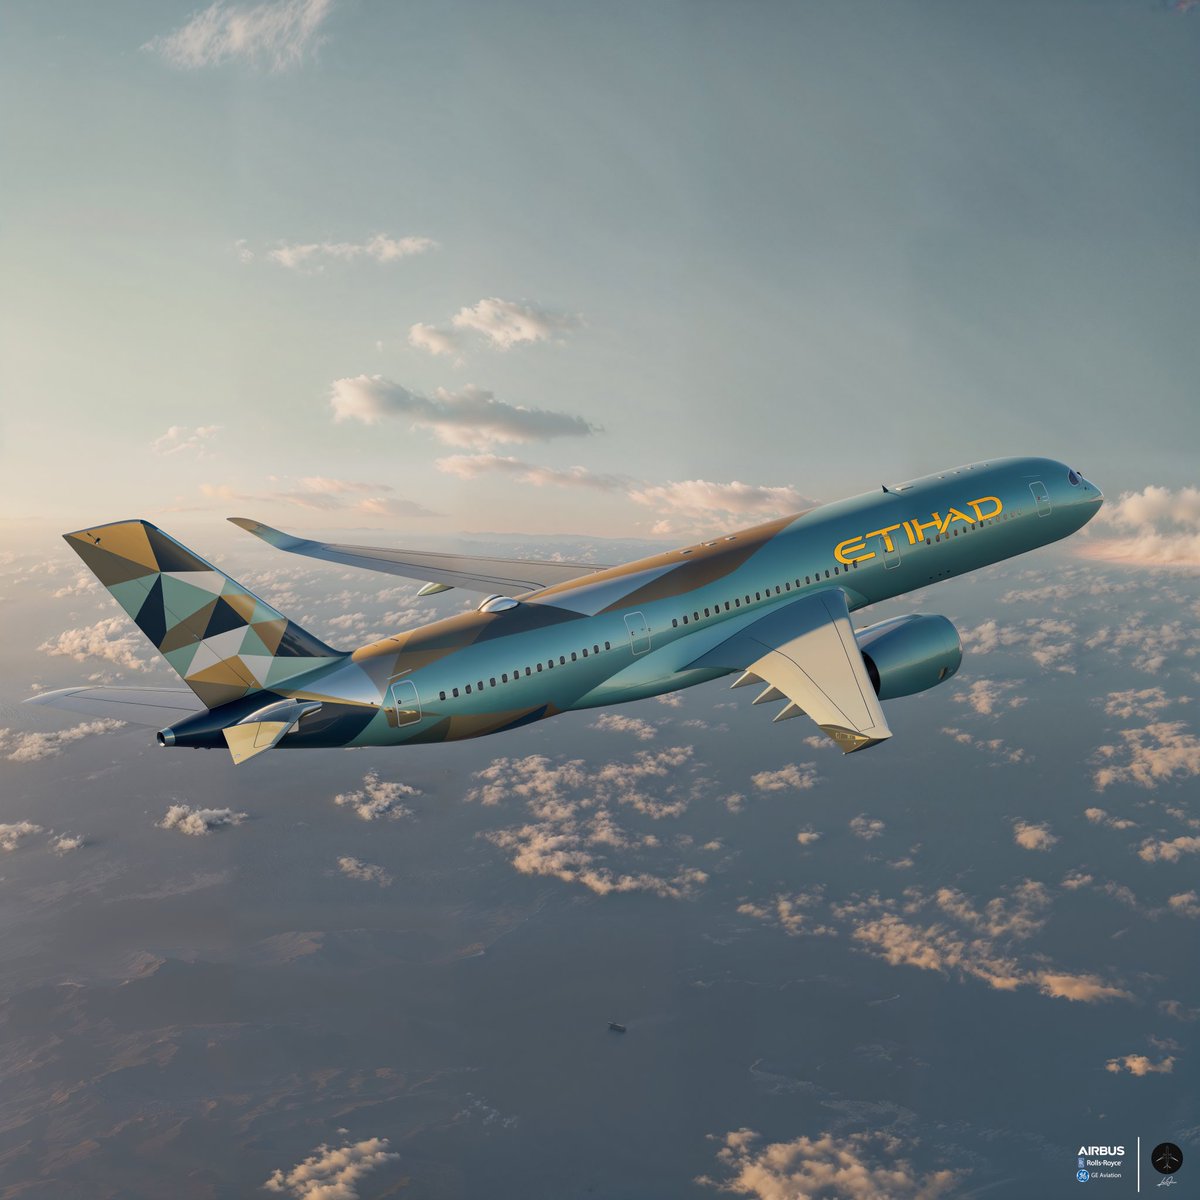 Artistry Above the Clouds: Etihad Airways redefines flying with these stunning liveries on the A350-1000.  #aviationdaily #avporn #instagramaviation #pilot #instaaviation #planespotting #plane #aviators #instaplane #boeing #airbus #aviator #pilotlife #megaplane #airplanes